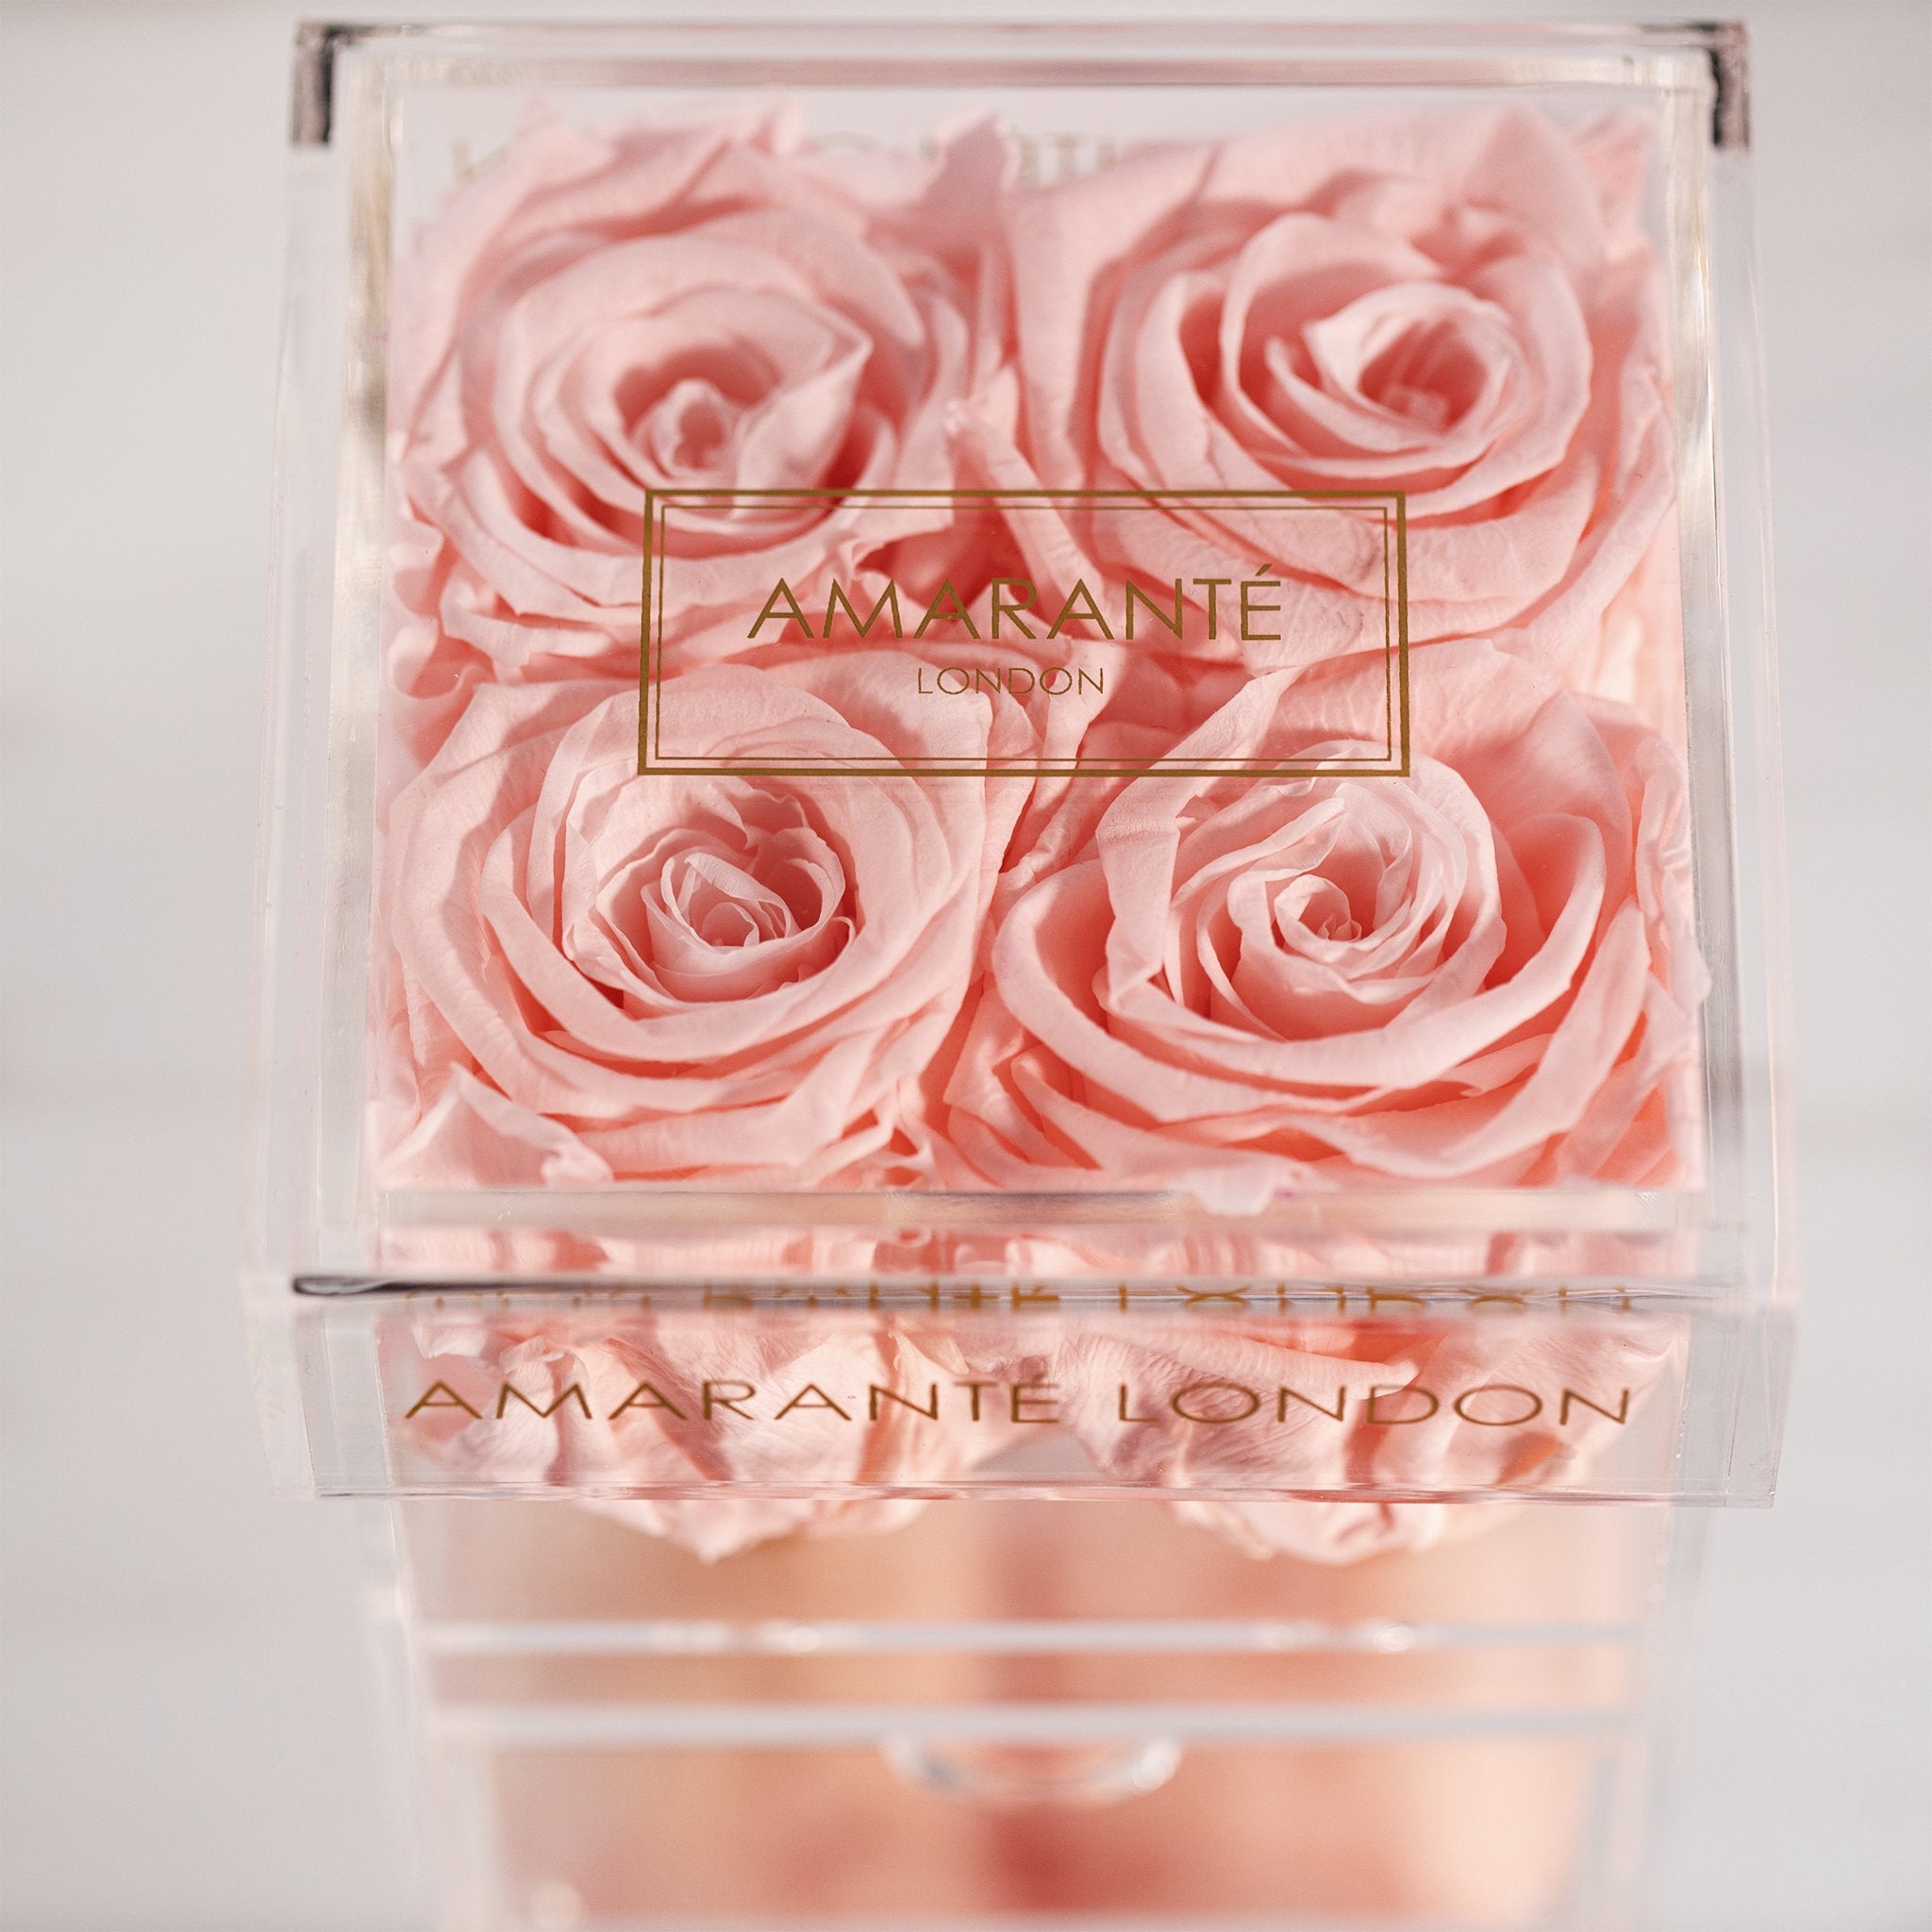 Delicate light pink rose photographed in a dapper box 